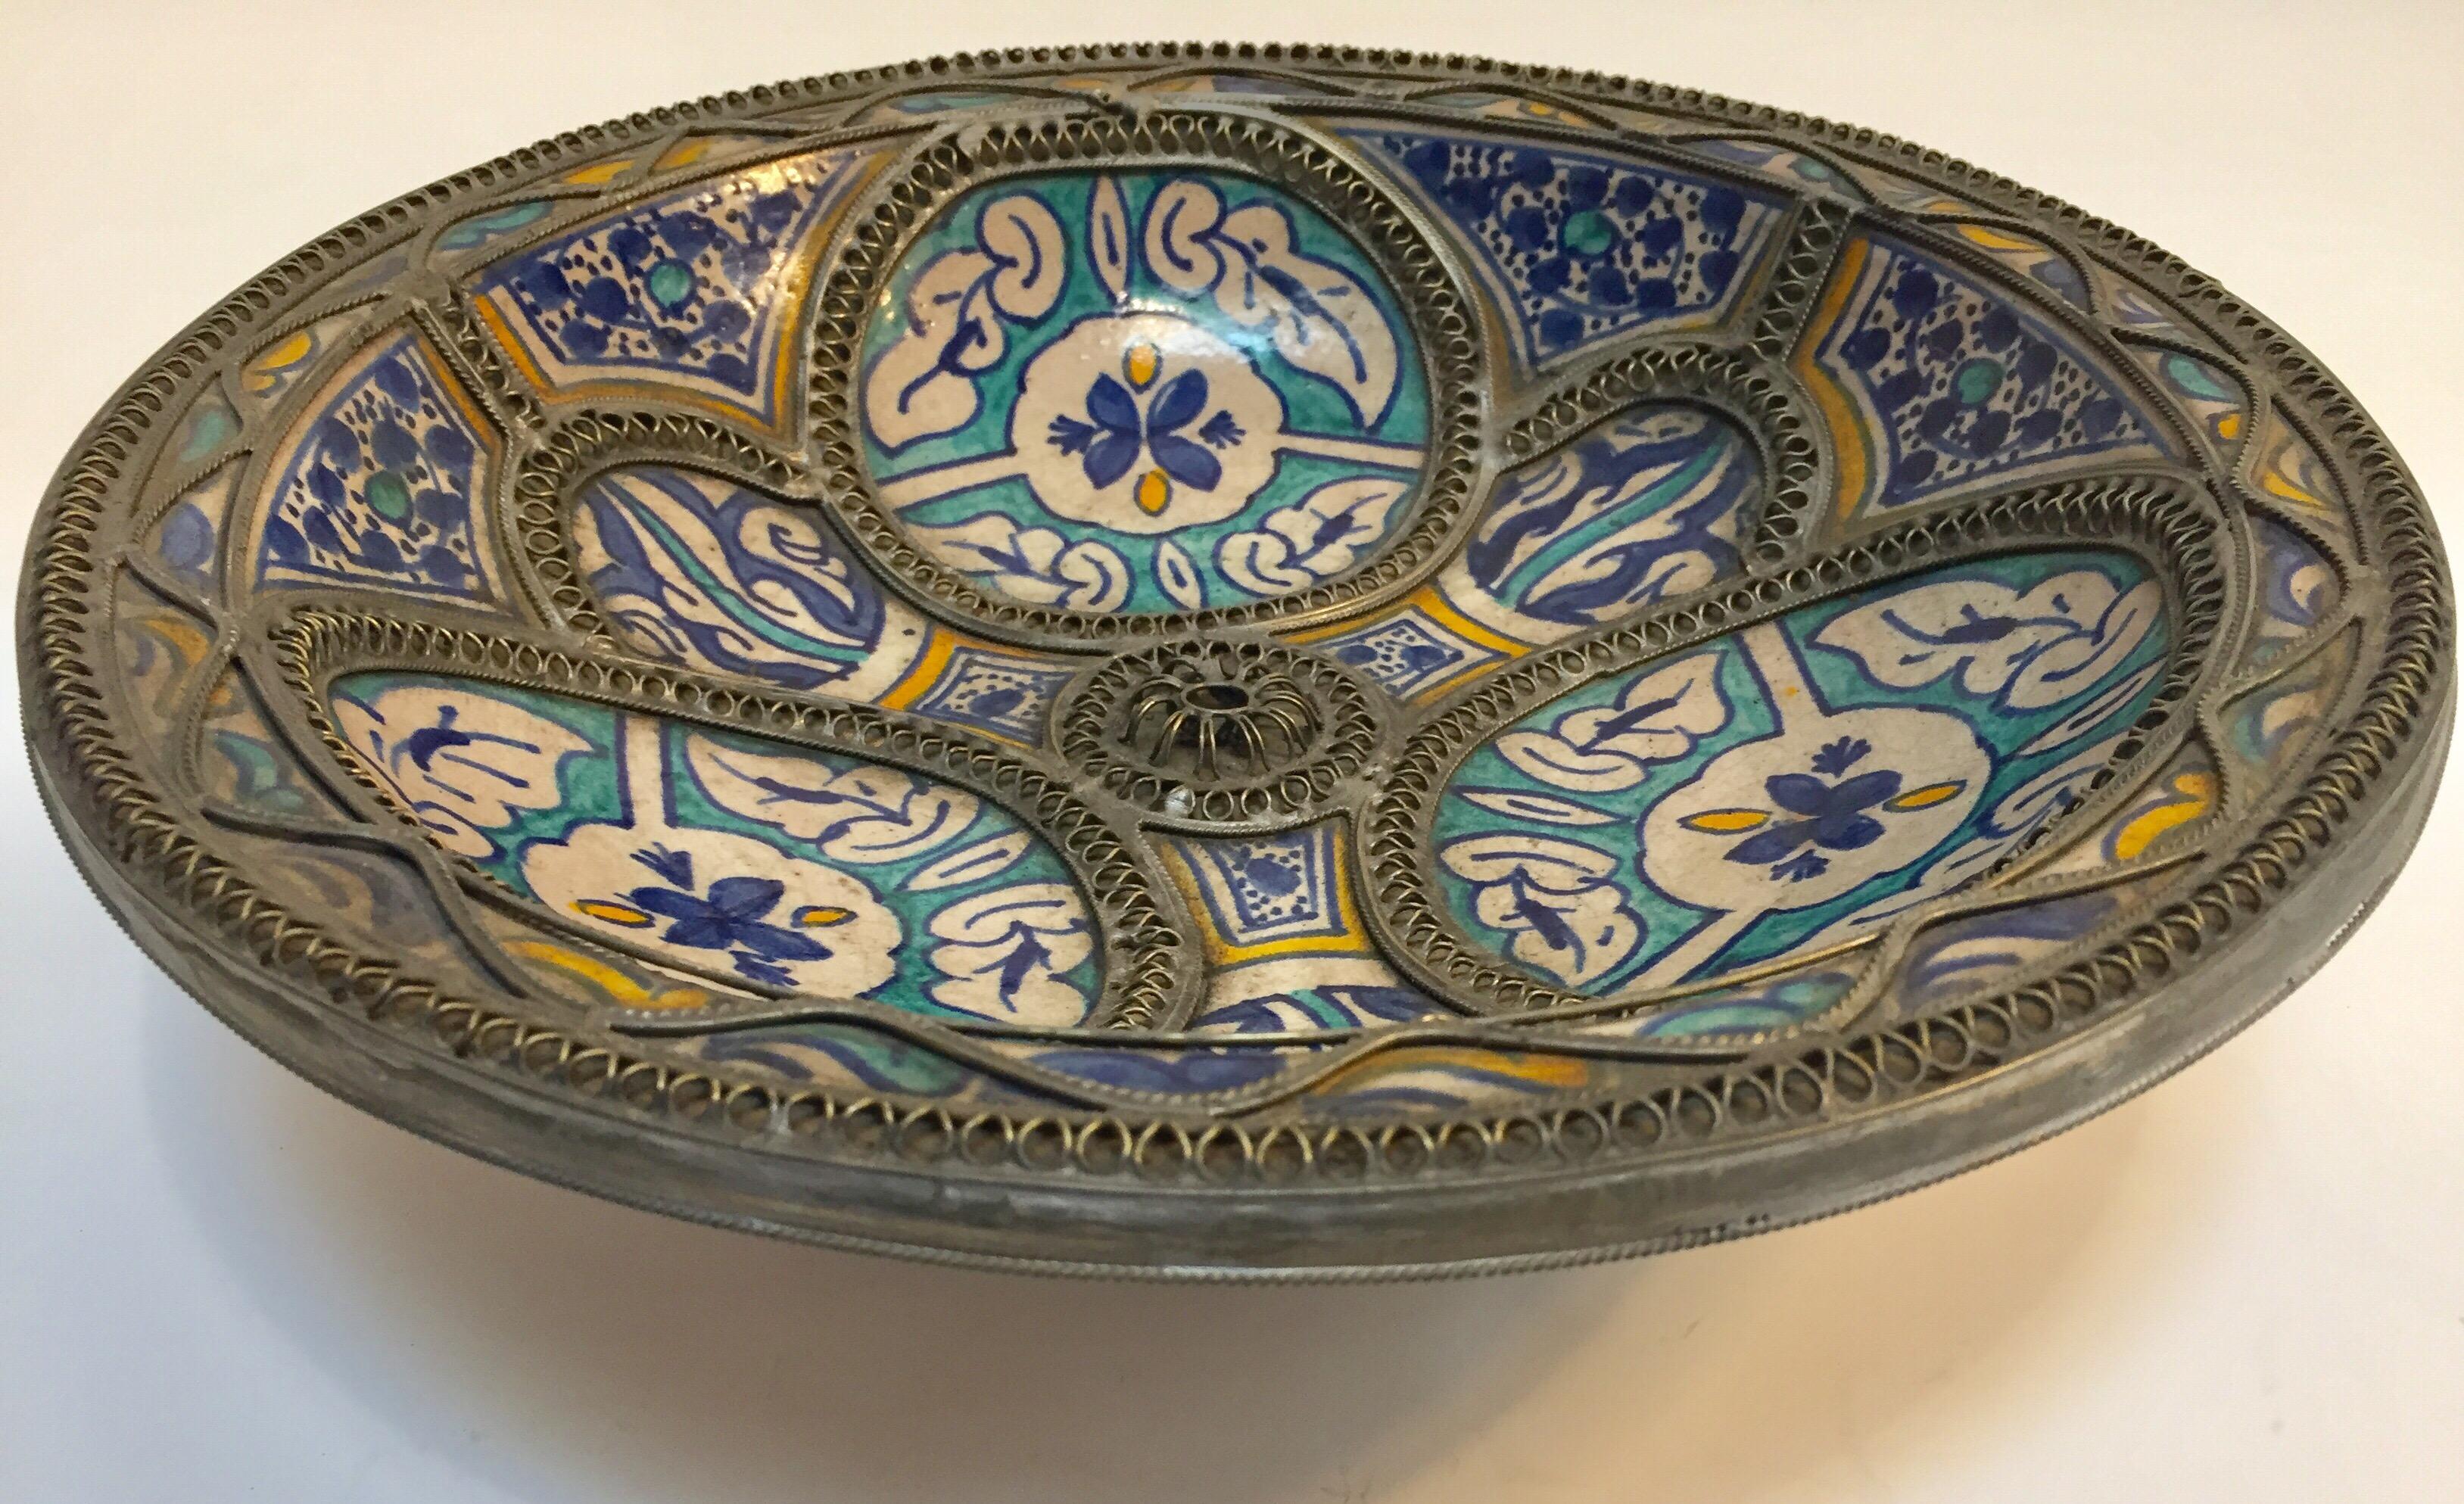 Handcrafted large Moroccan polychrome decorative ceramic plate from Fez. Bleu de Fez, very nice designs hand painted by artist in Fez.
Geometrical and floral designs and adorned with nickel silver filigree designs.